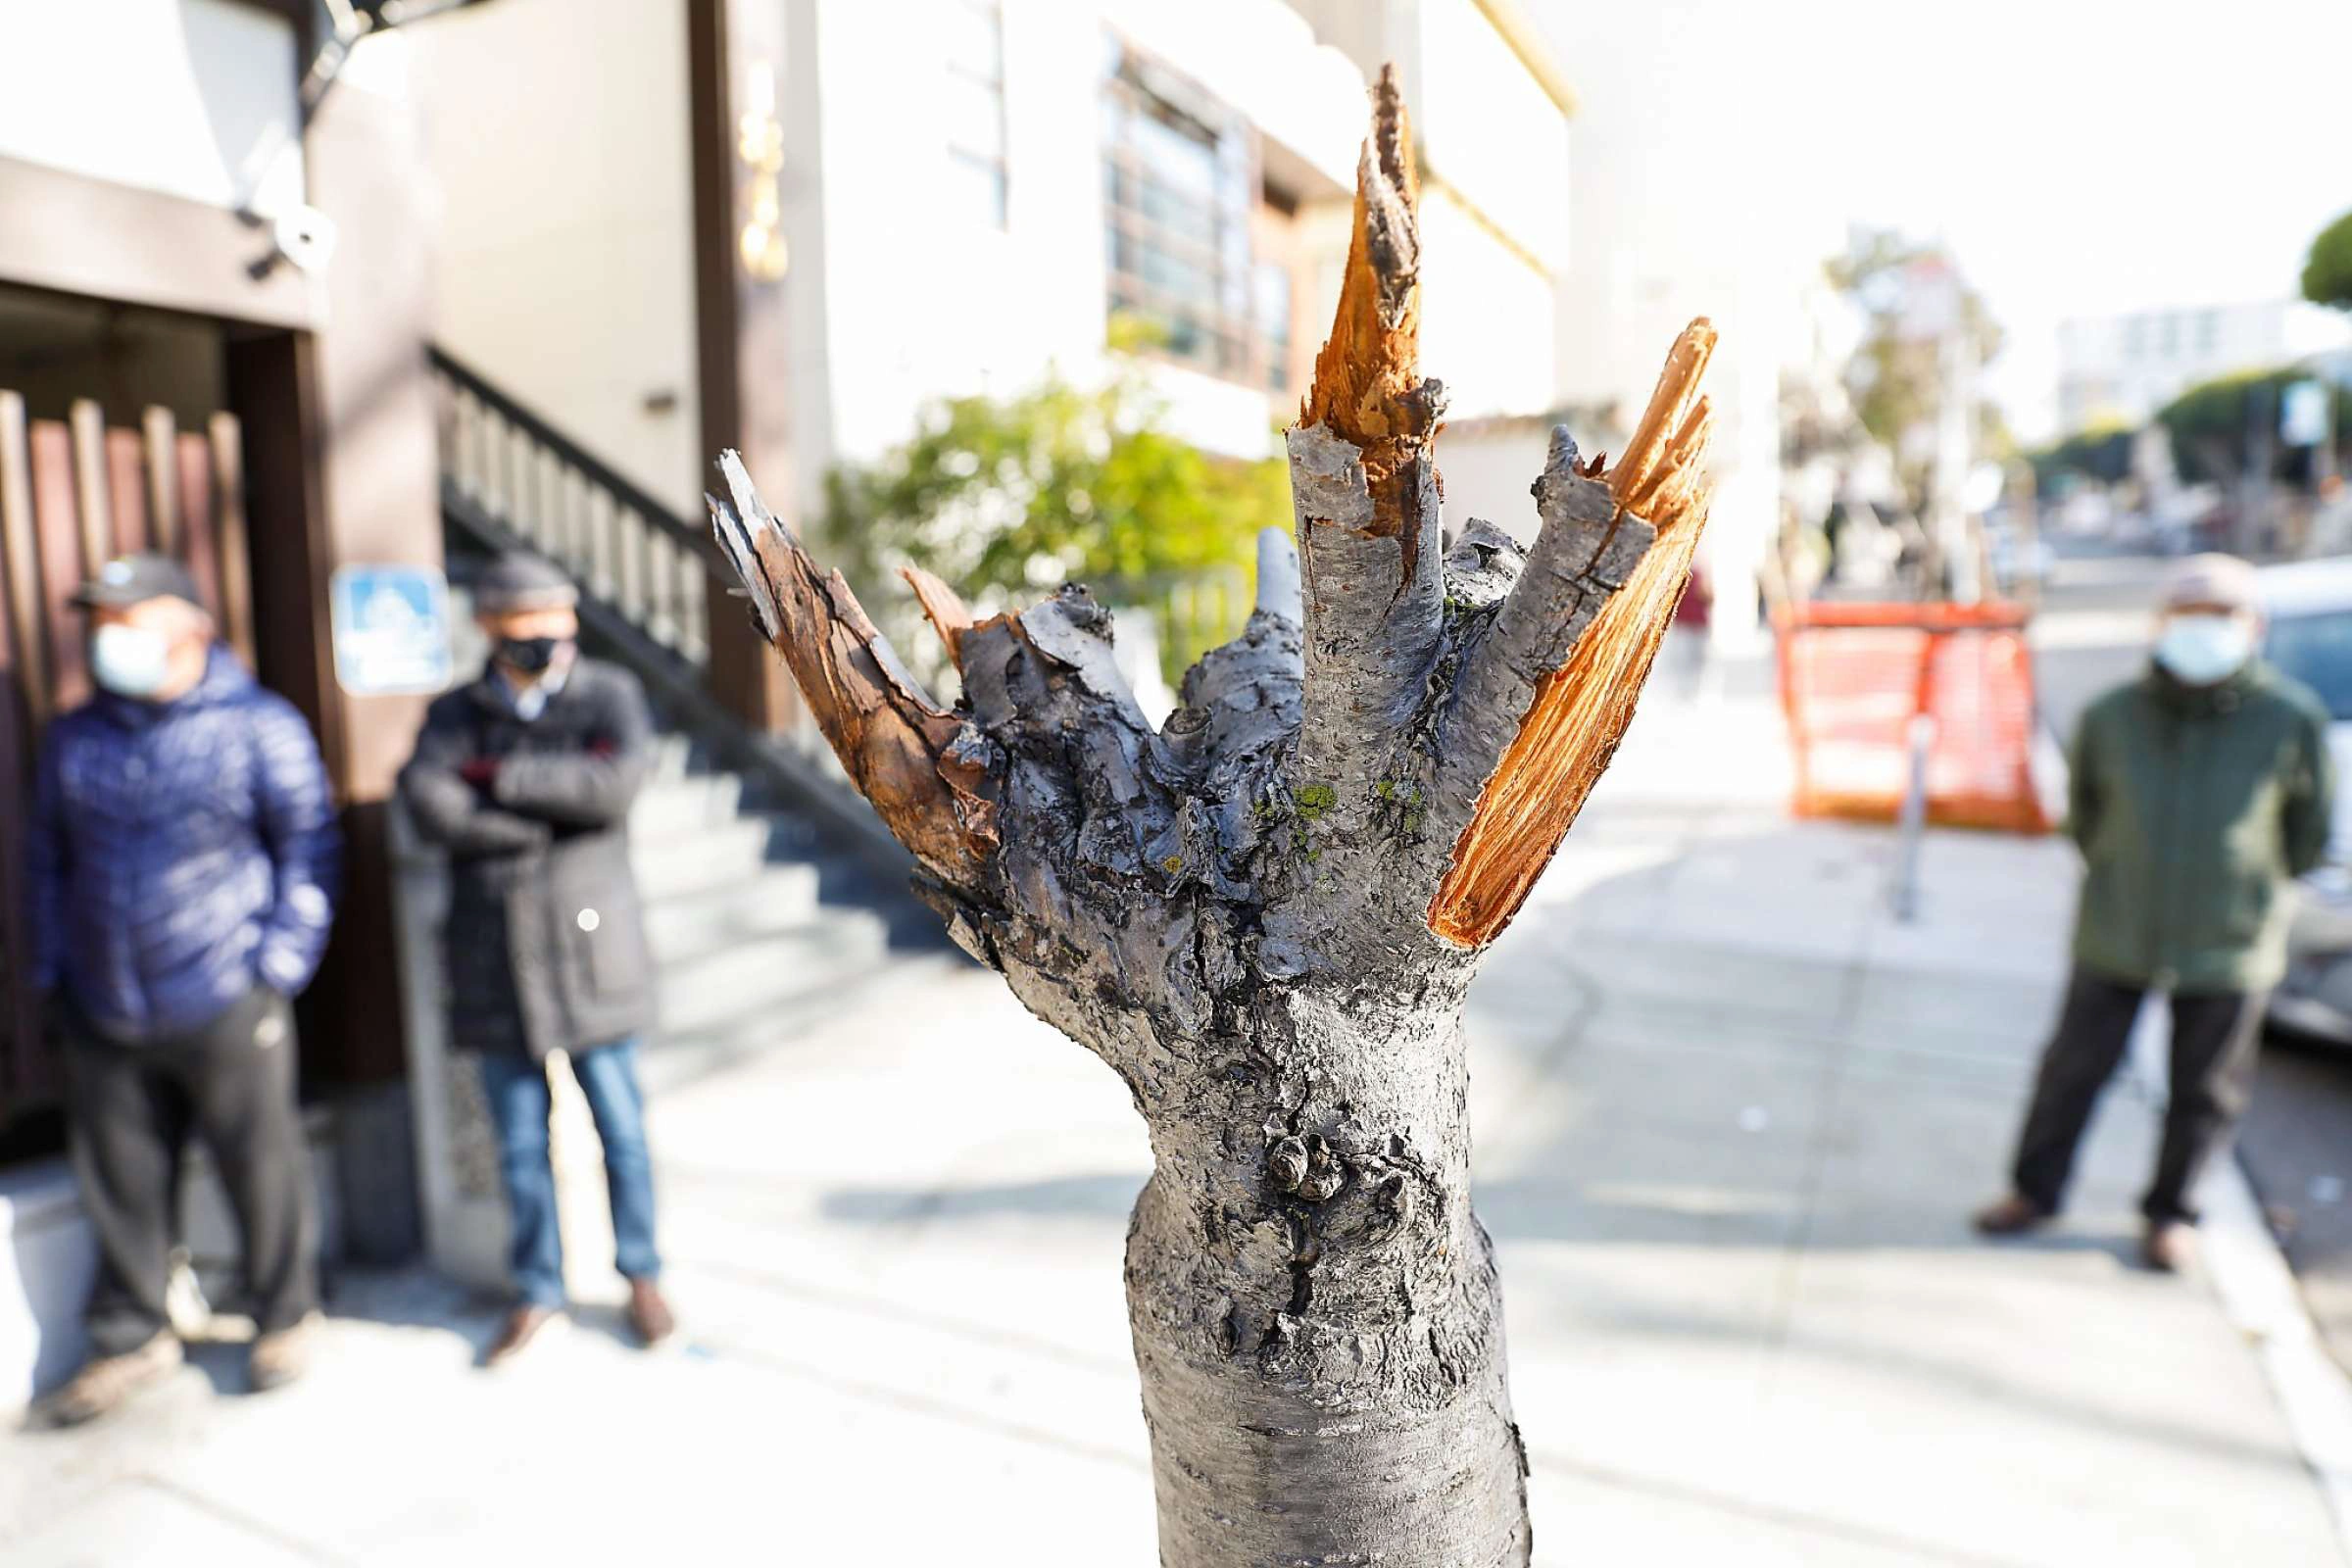 Defaced Cherry Blossom Tree in San Francisco